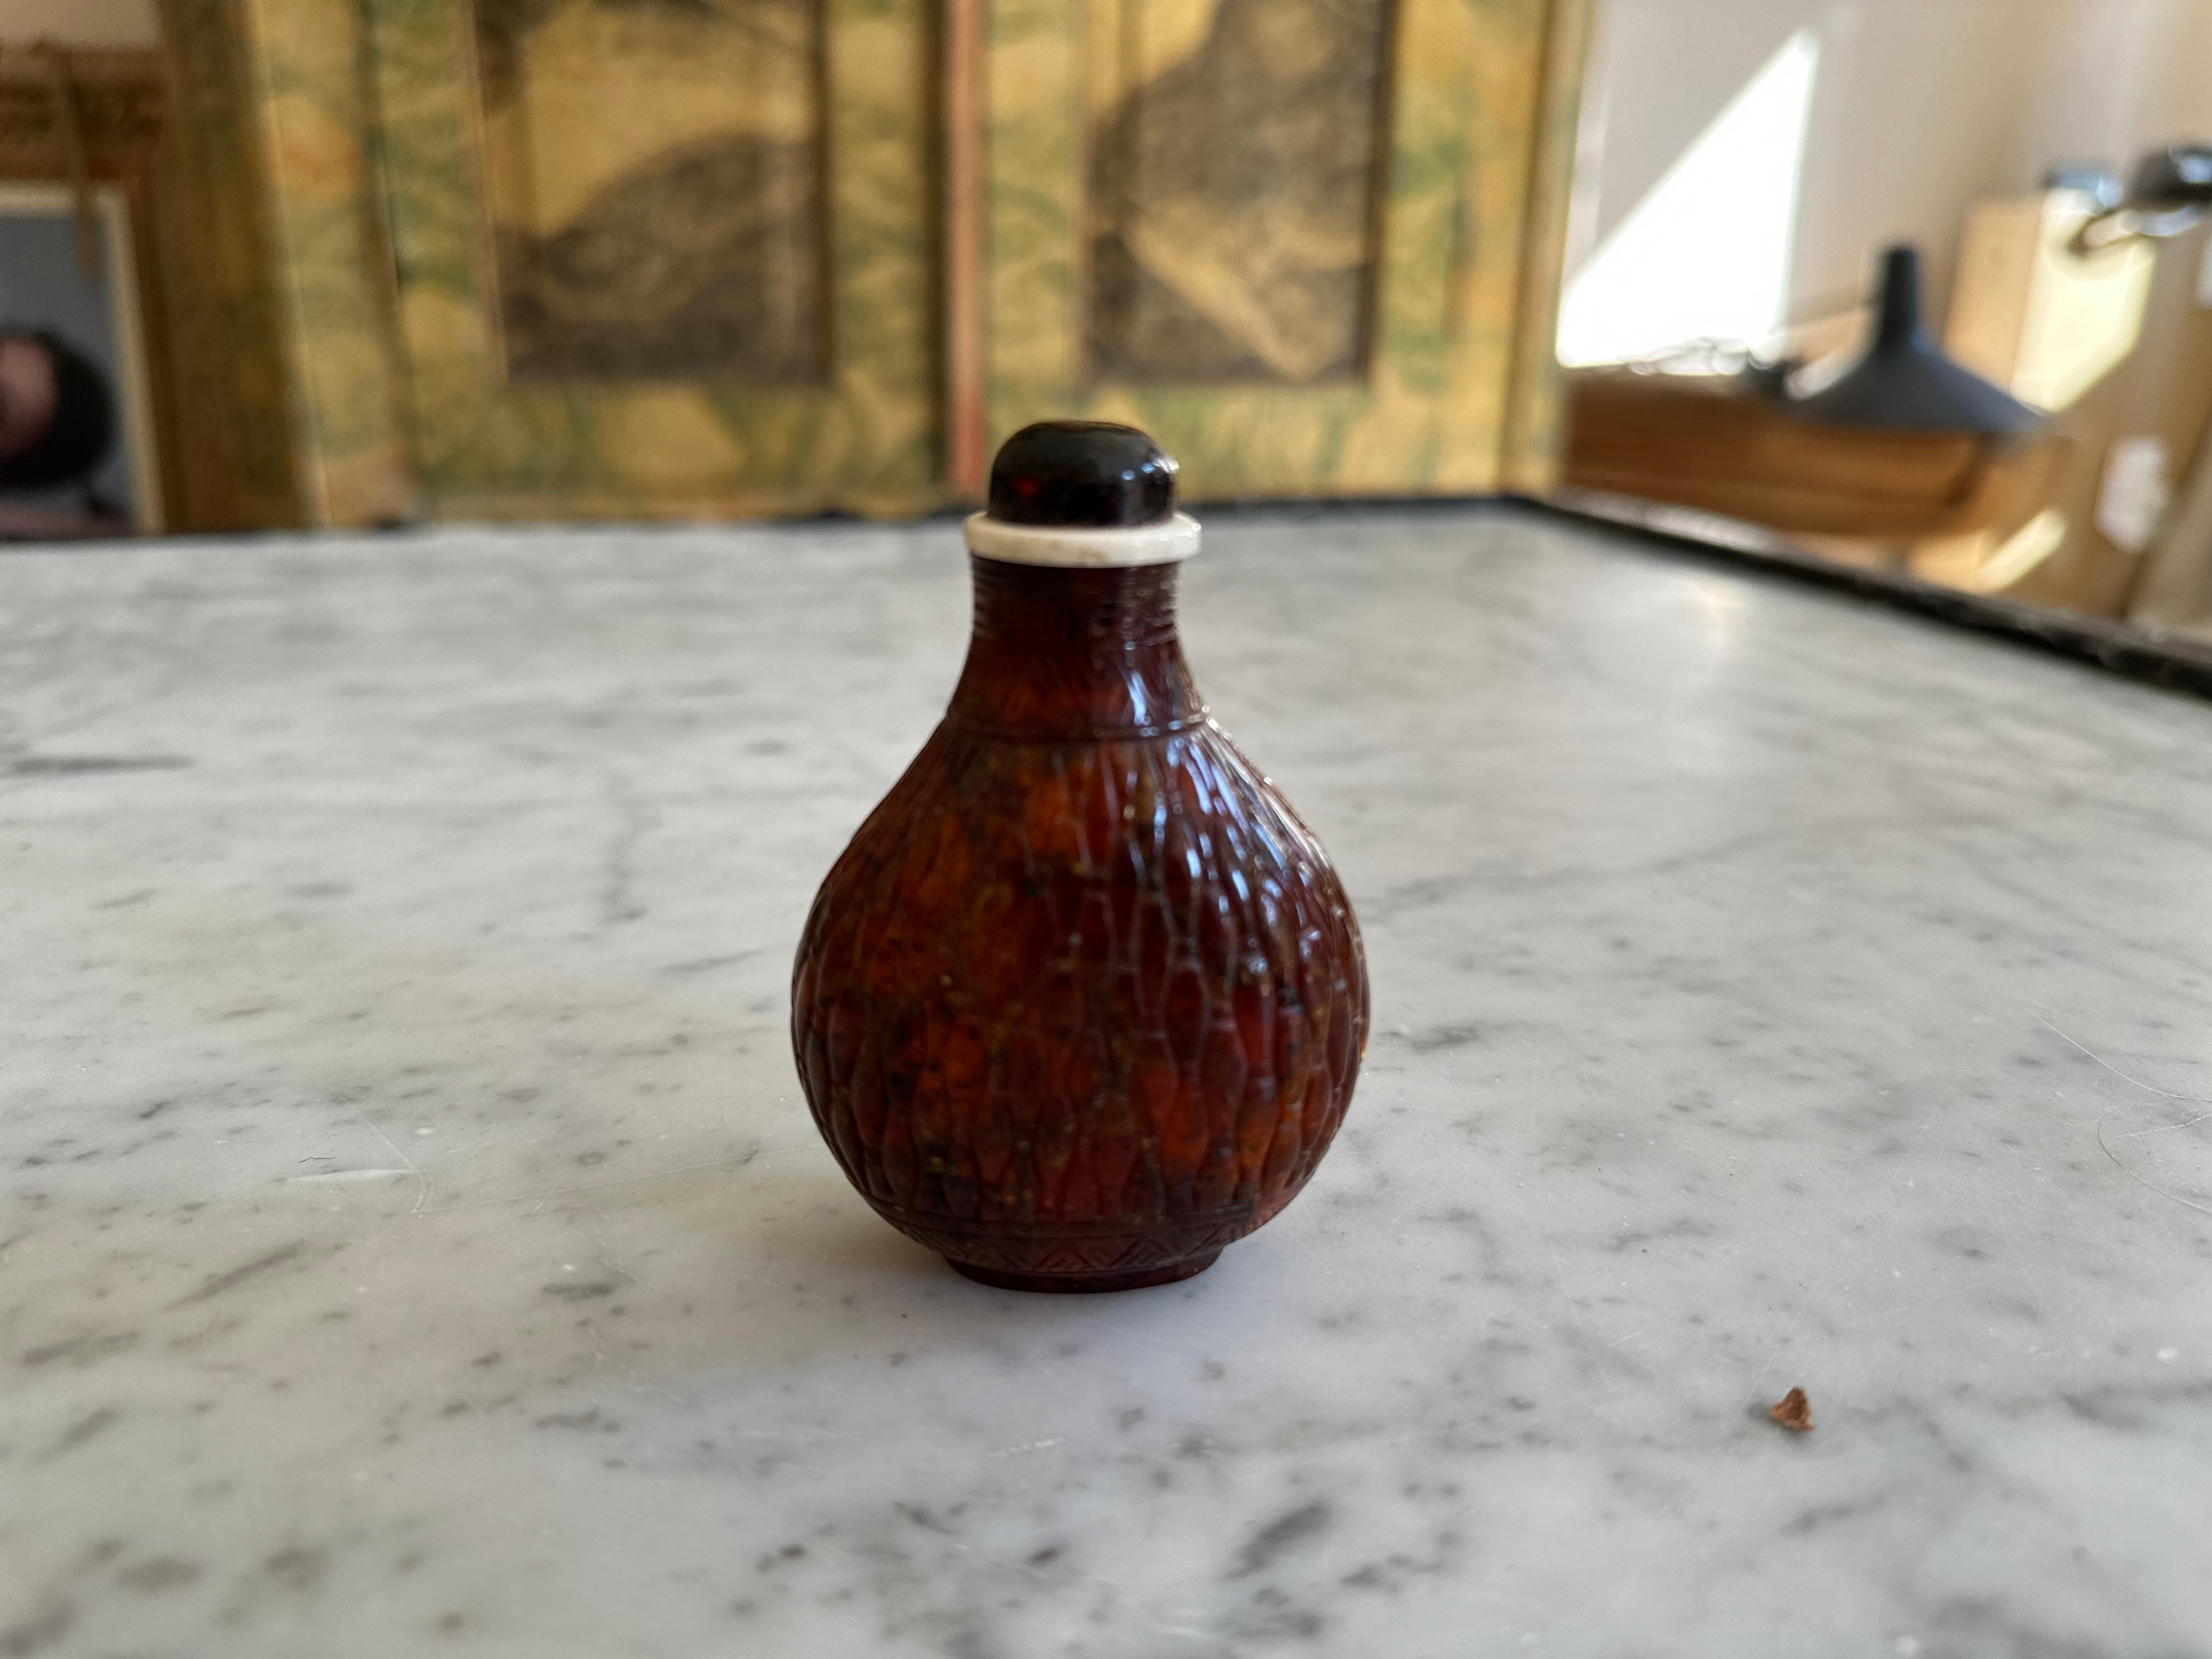 ntroducing our exquisite Asian Snuff Bottle, a true masterpiece crafted from the finest amber. This captivating piece boasts intricate relief carvings on its surface, showcasing the skilled craftsmanship of our artisans. The amber body of the bottle